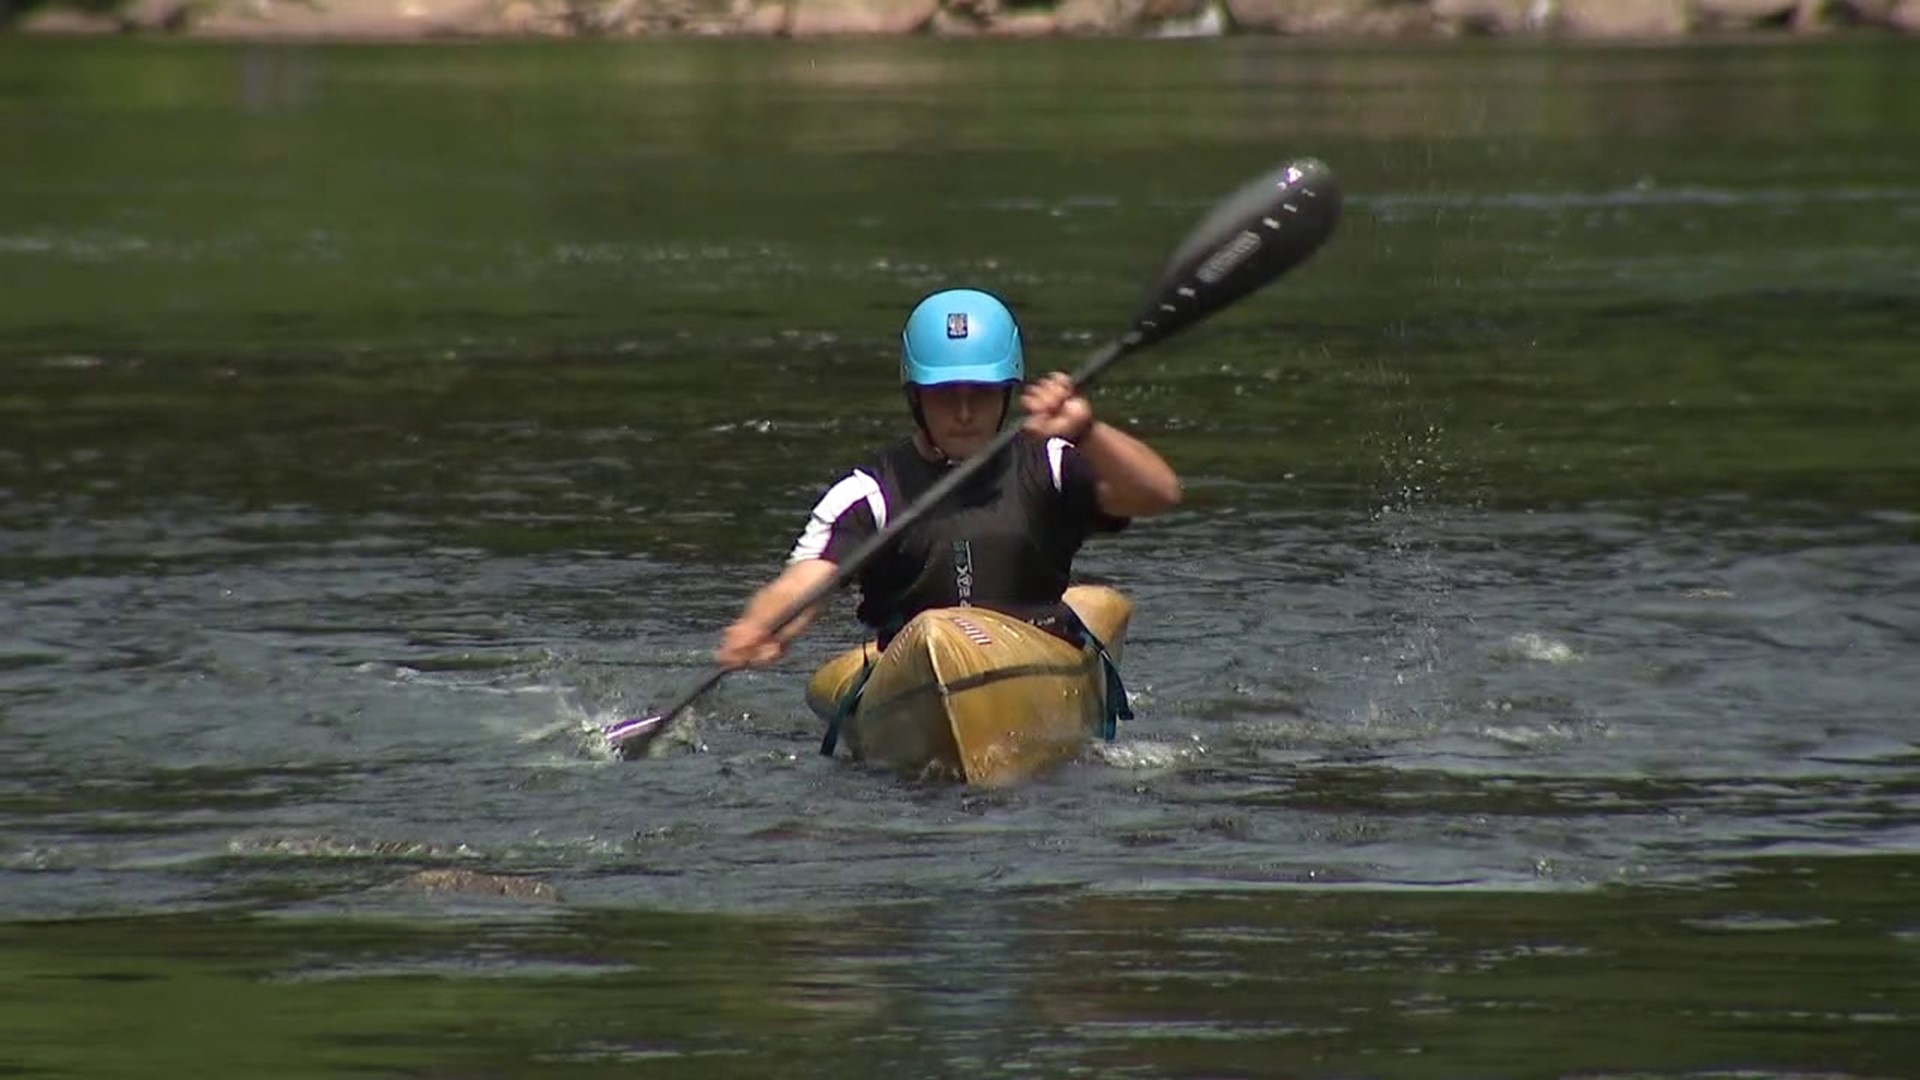 Stephen Bretzik and three other Team USA members leave in two weeks to head to Europe for the Junior Wildwater World Championship.